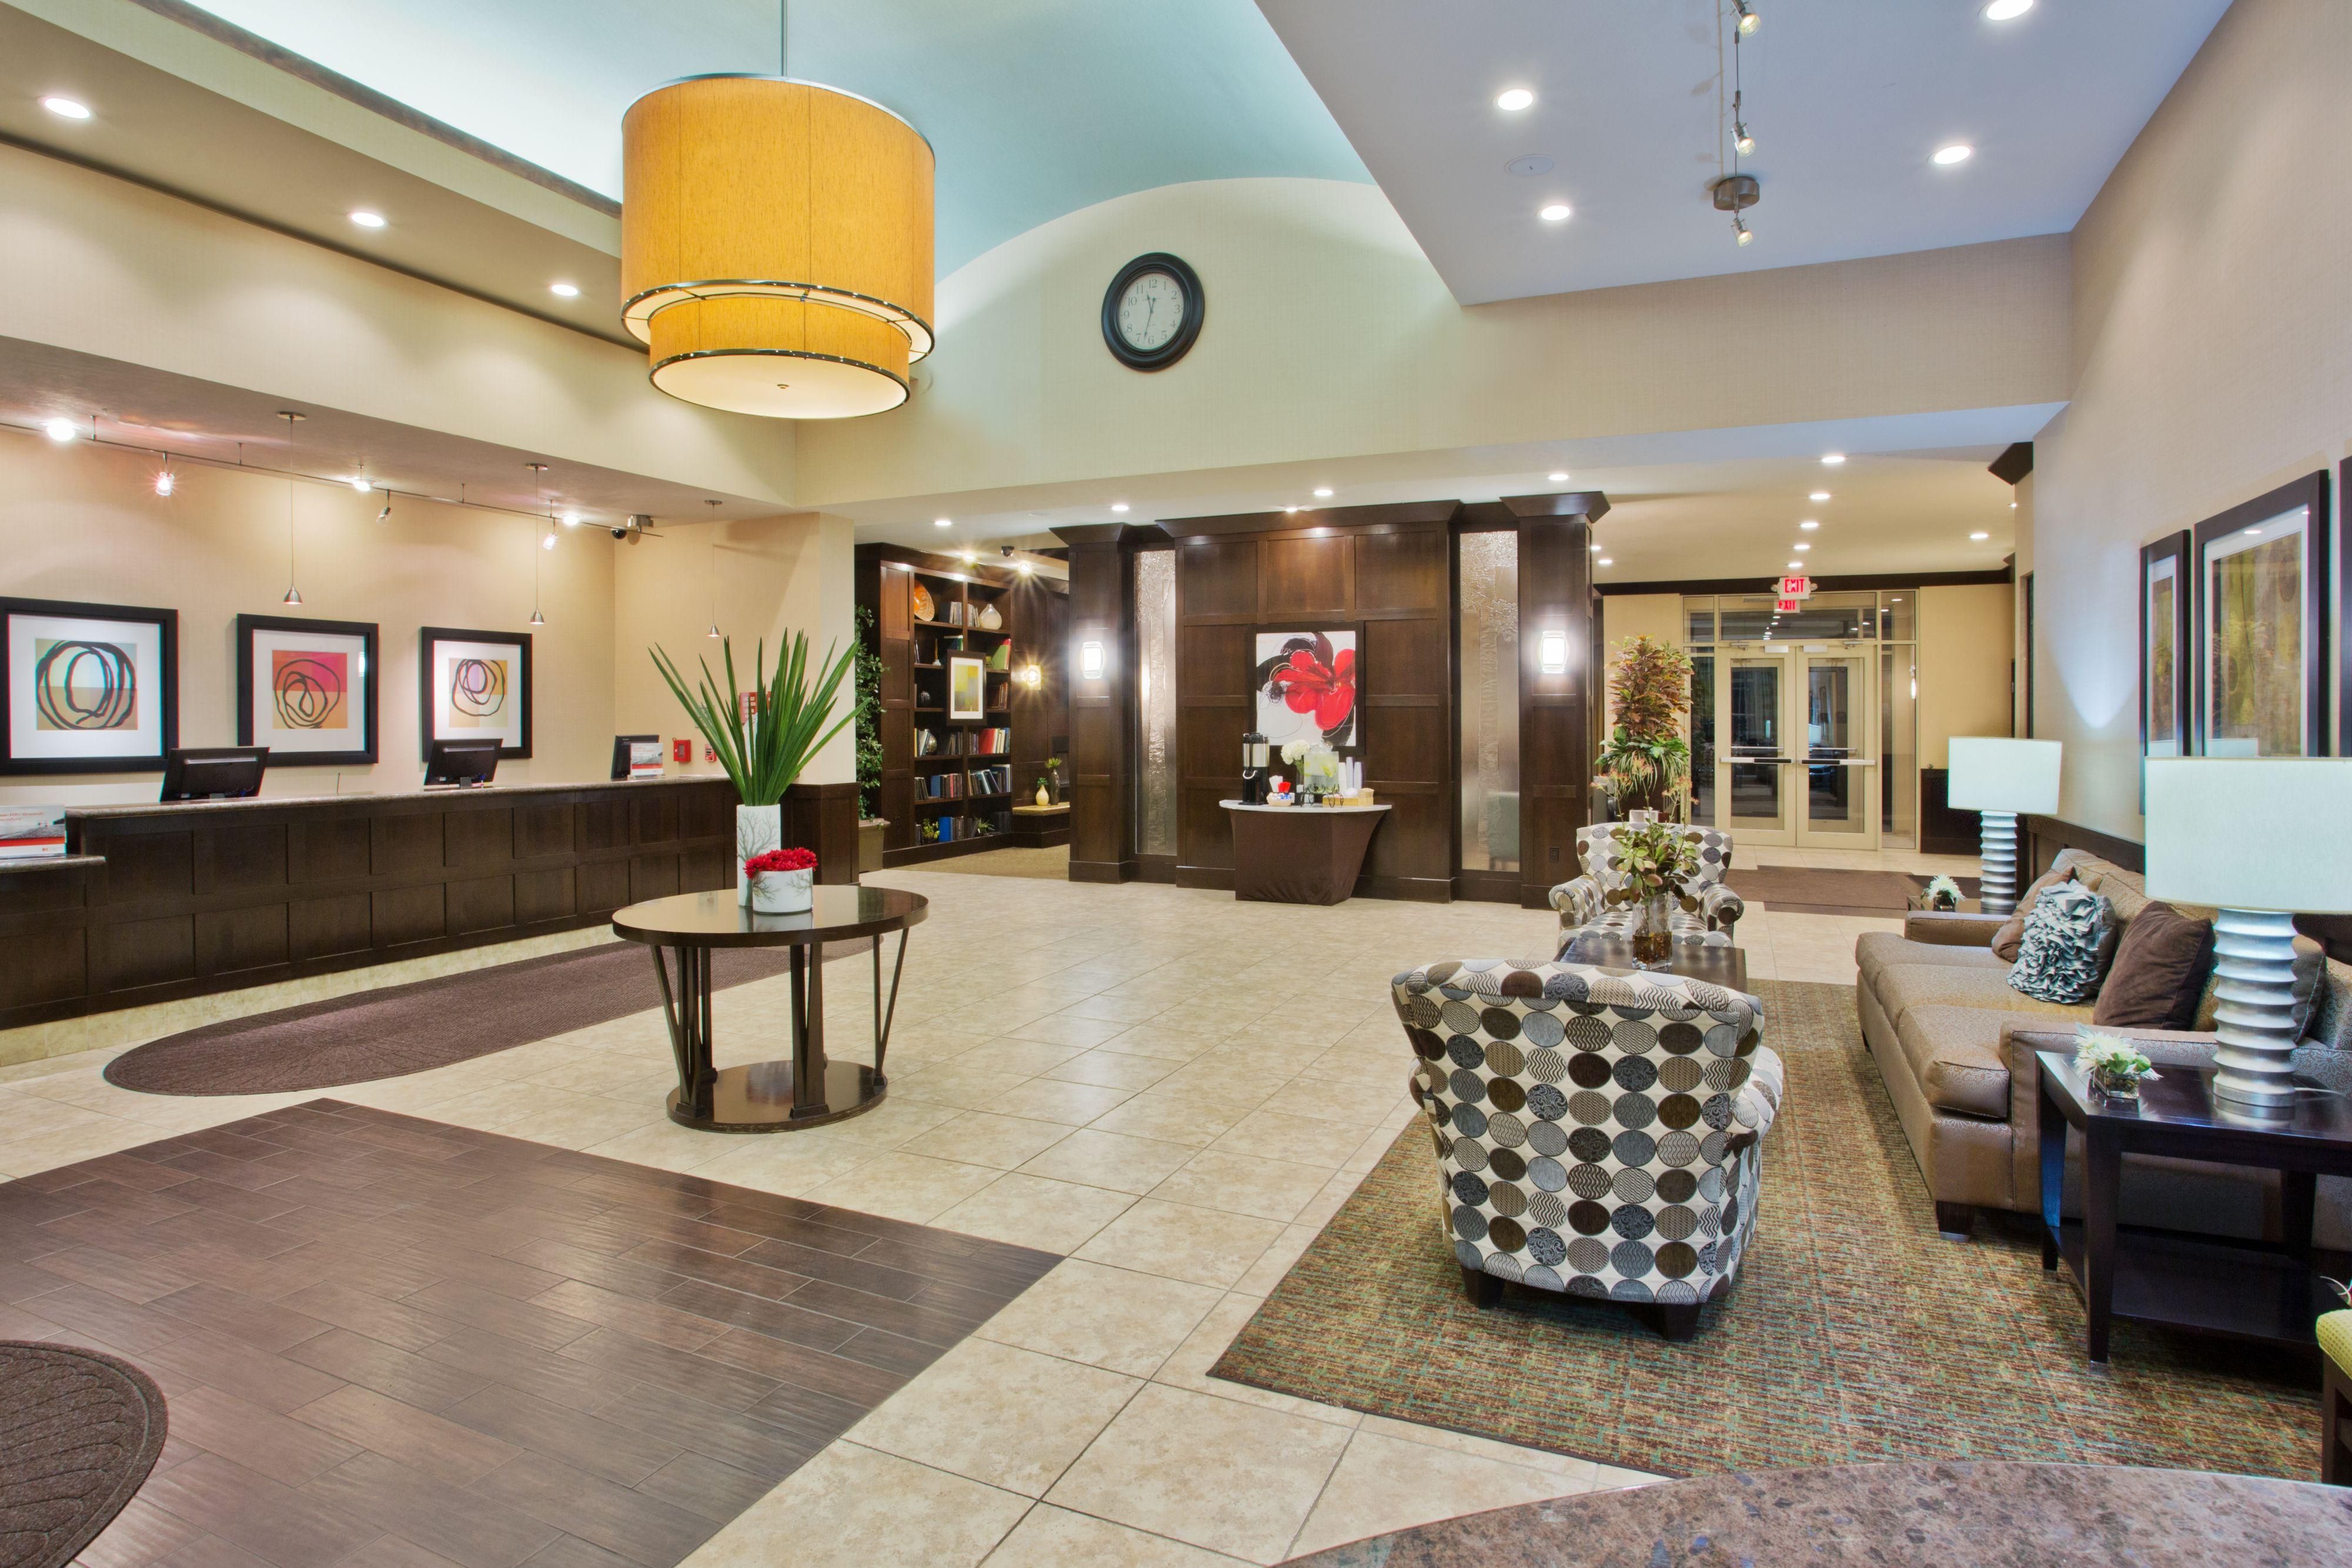 Our lobby is bright and welcoming